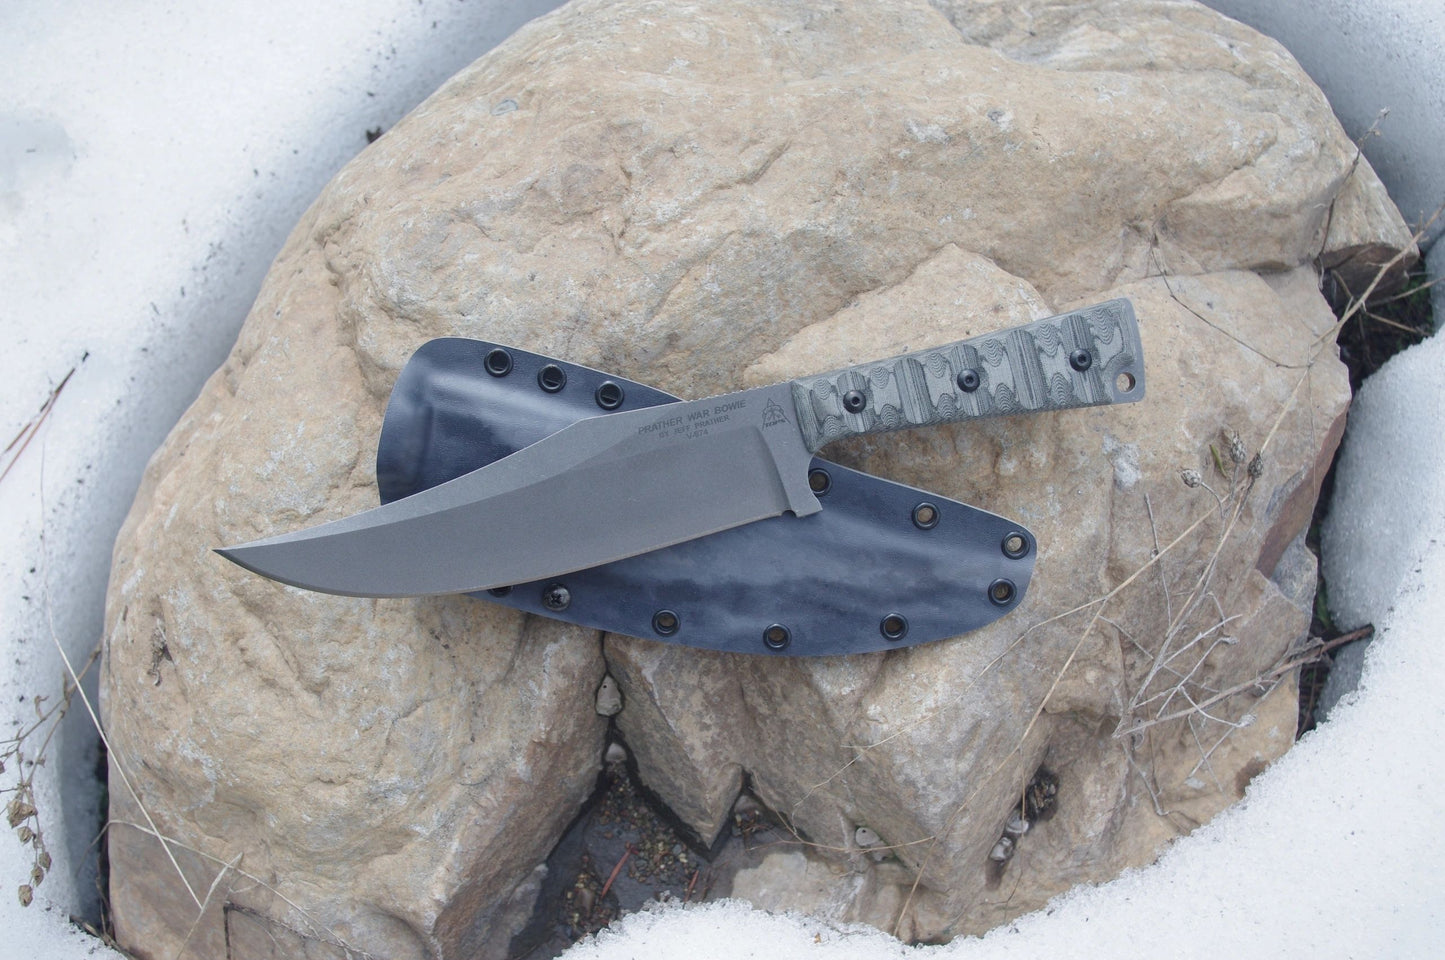 TOPS KNIVES PRATHER WAR BOWIE A-TACS LE CUSTOM KYDEX SHEATH BY RED HILL SHEATHS **KNIFE NOT INCLUDED*